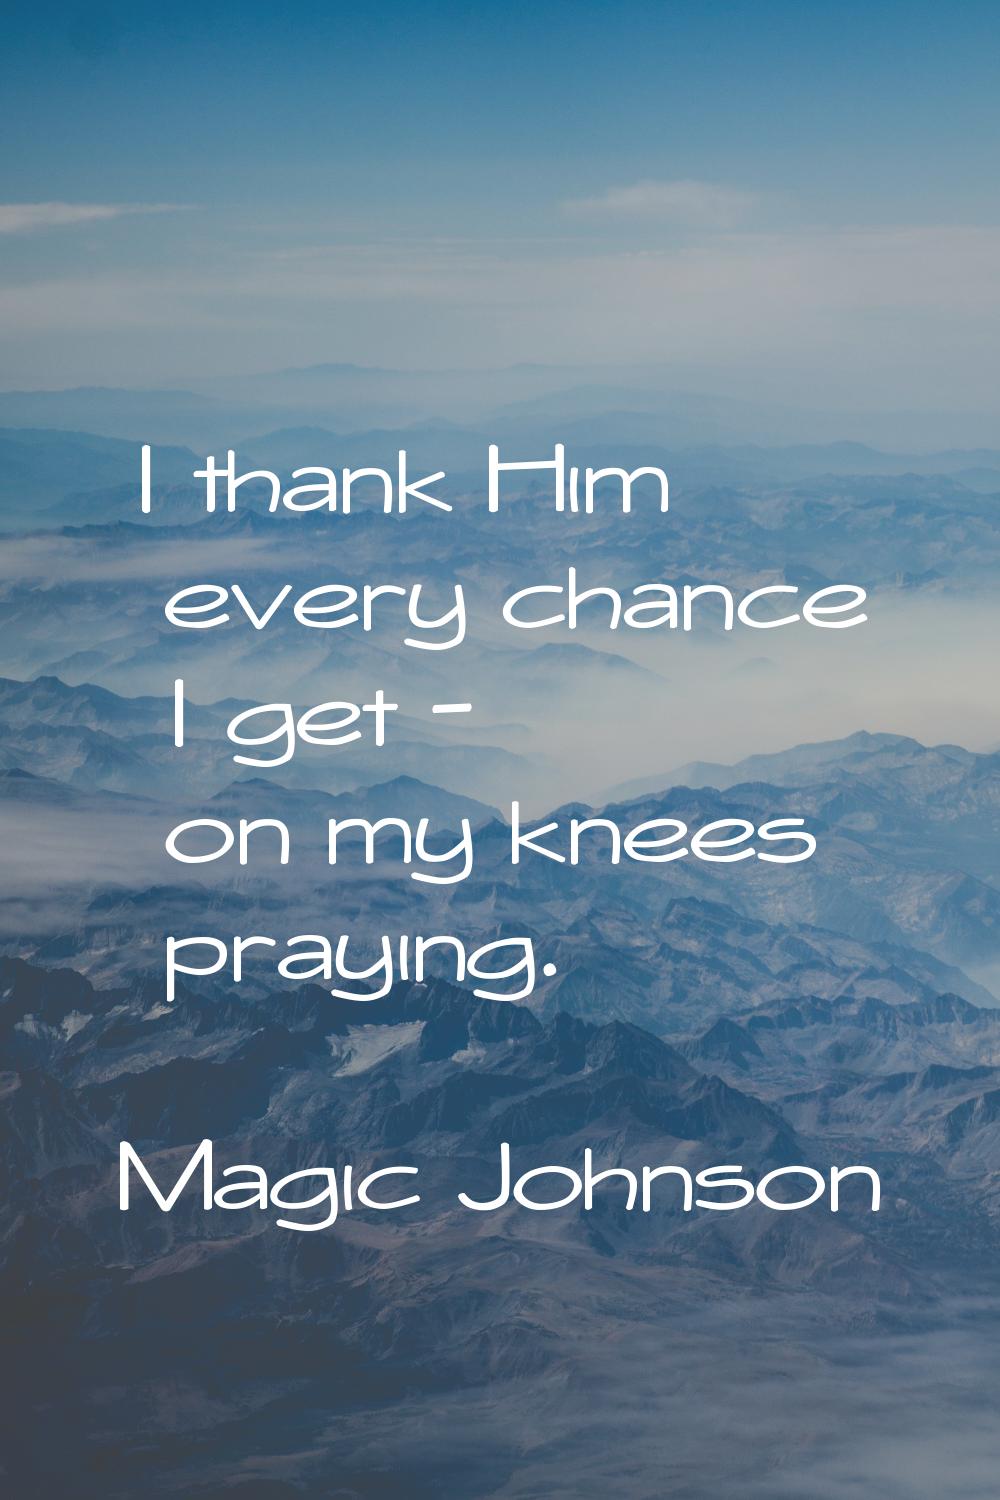 I thank Him every chance I get - on my knees praying.